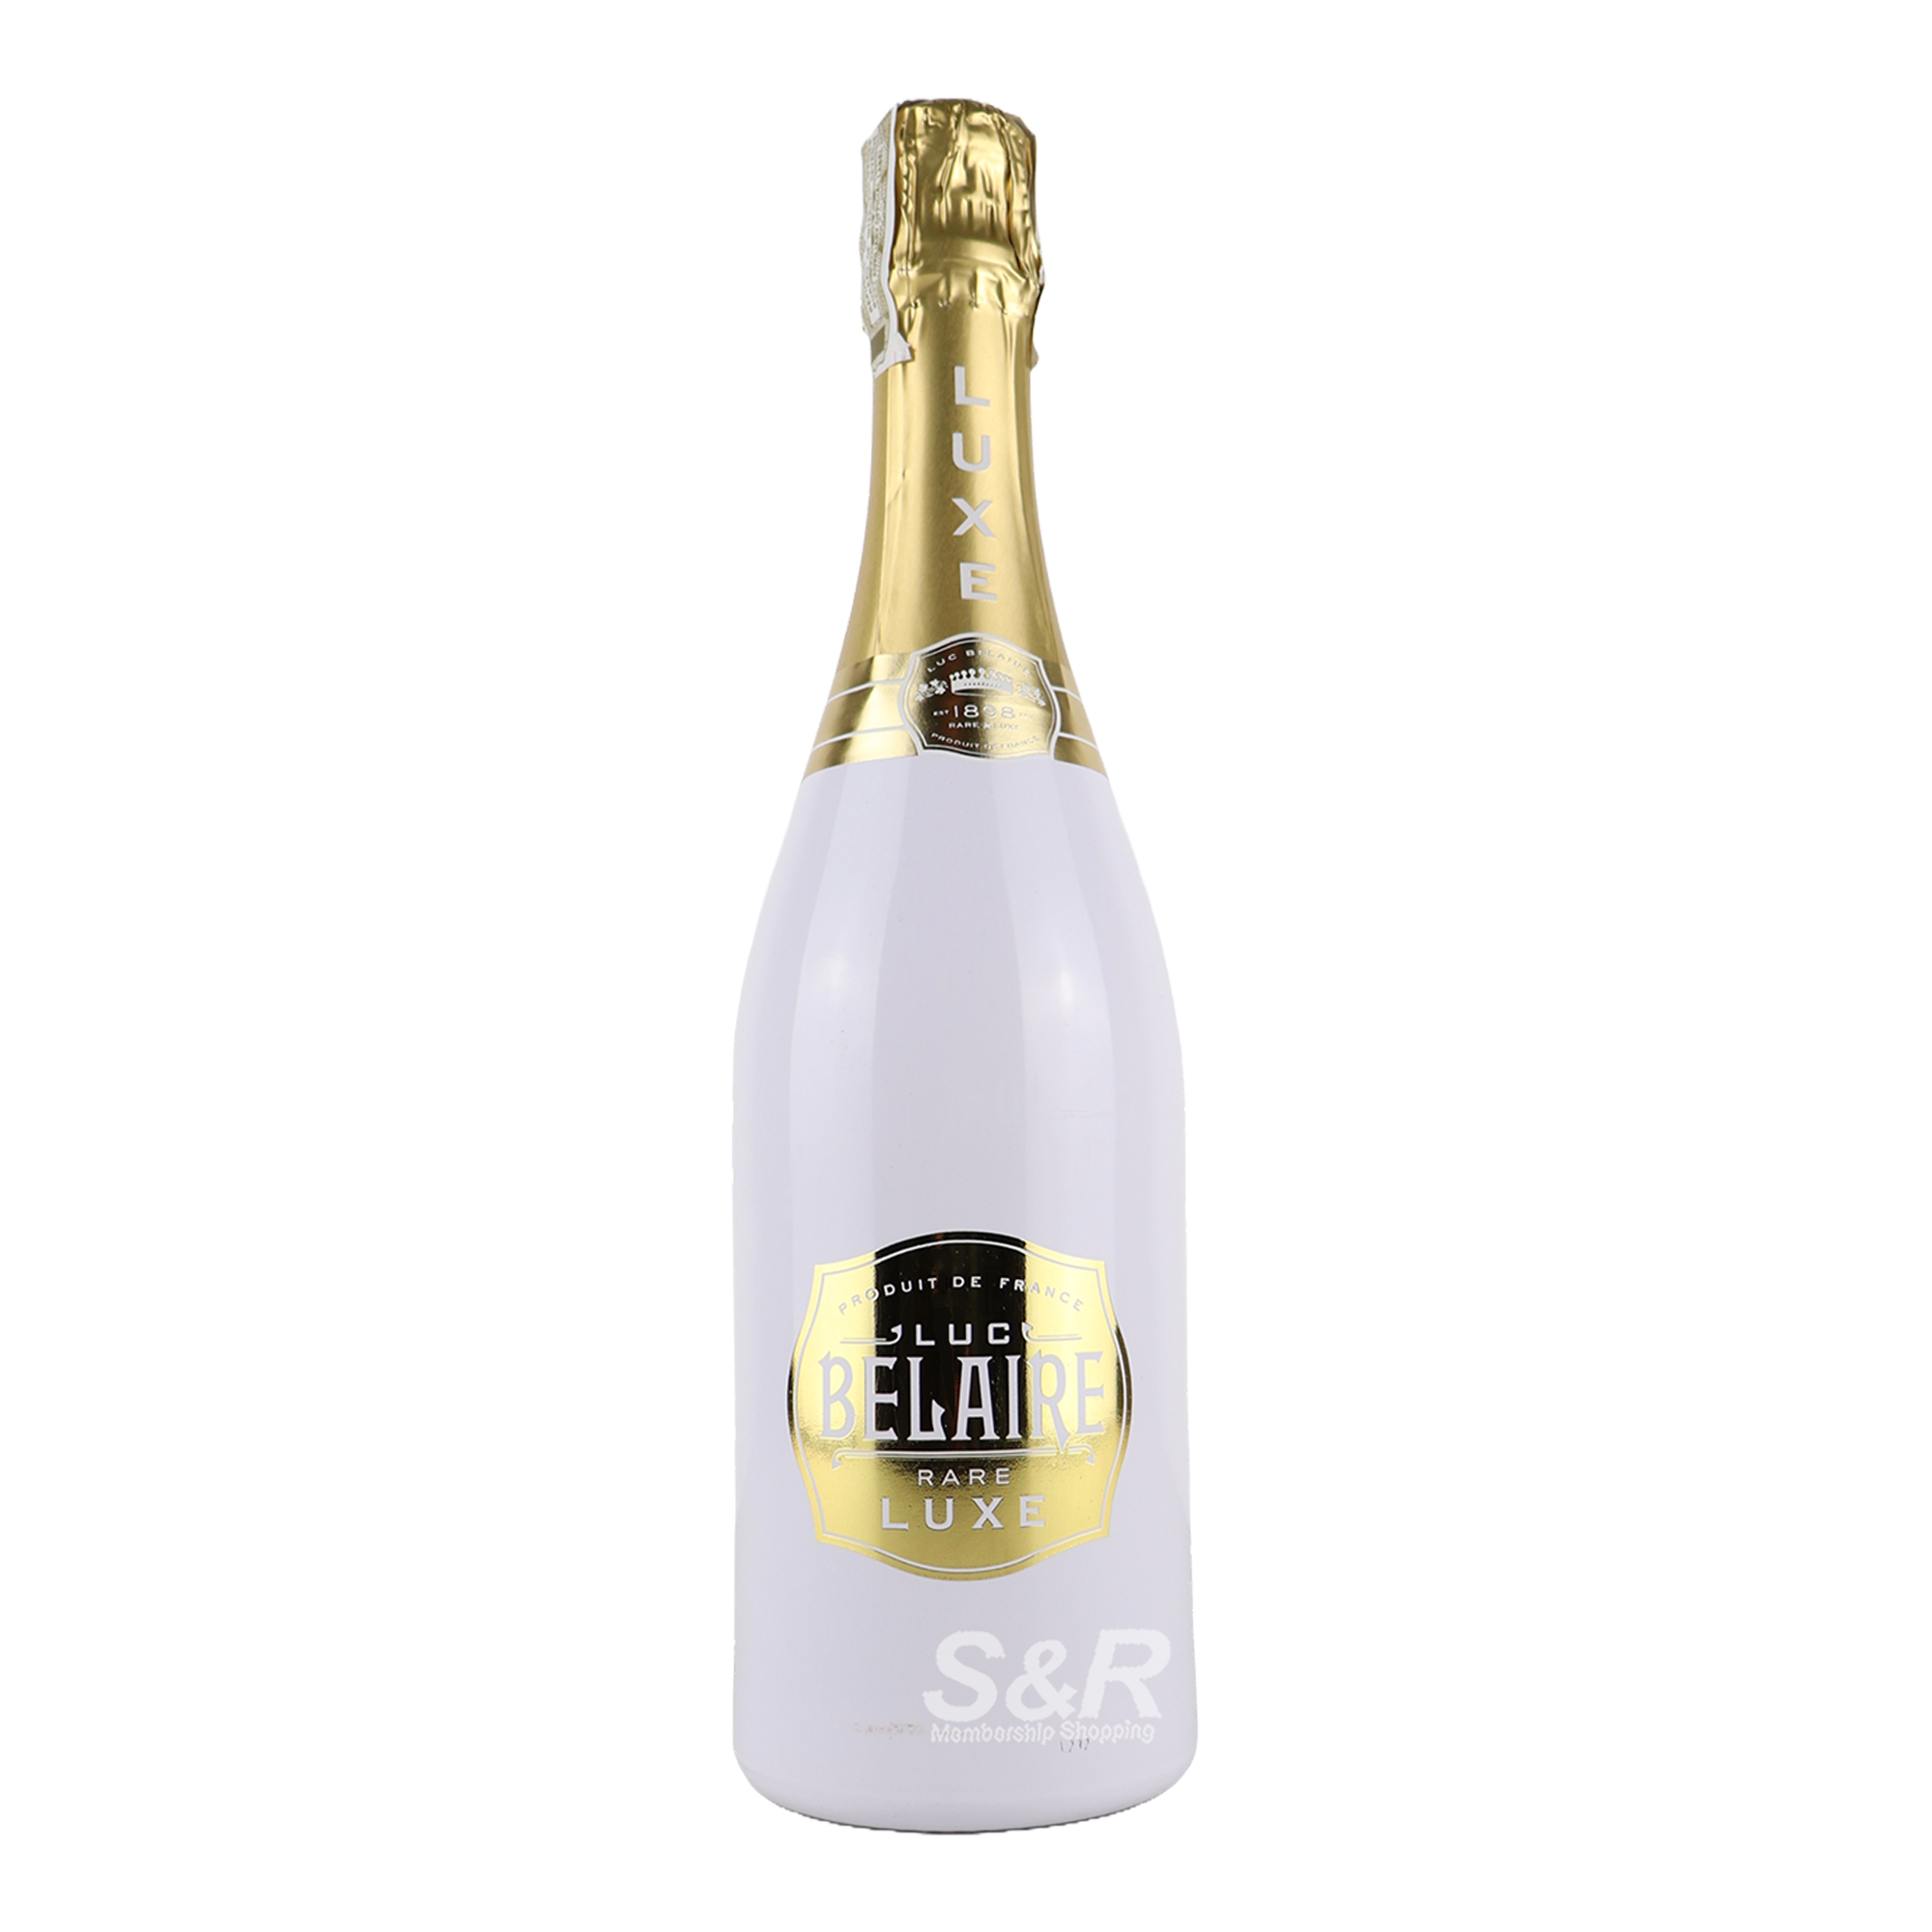 Luc Belaire Rare Luxe Sparkling Wine 750mL